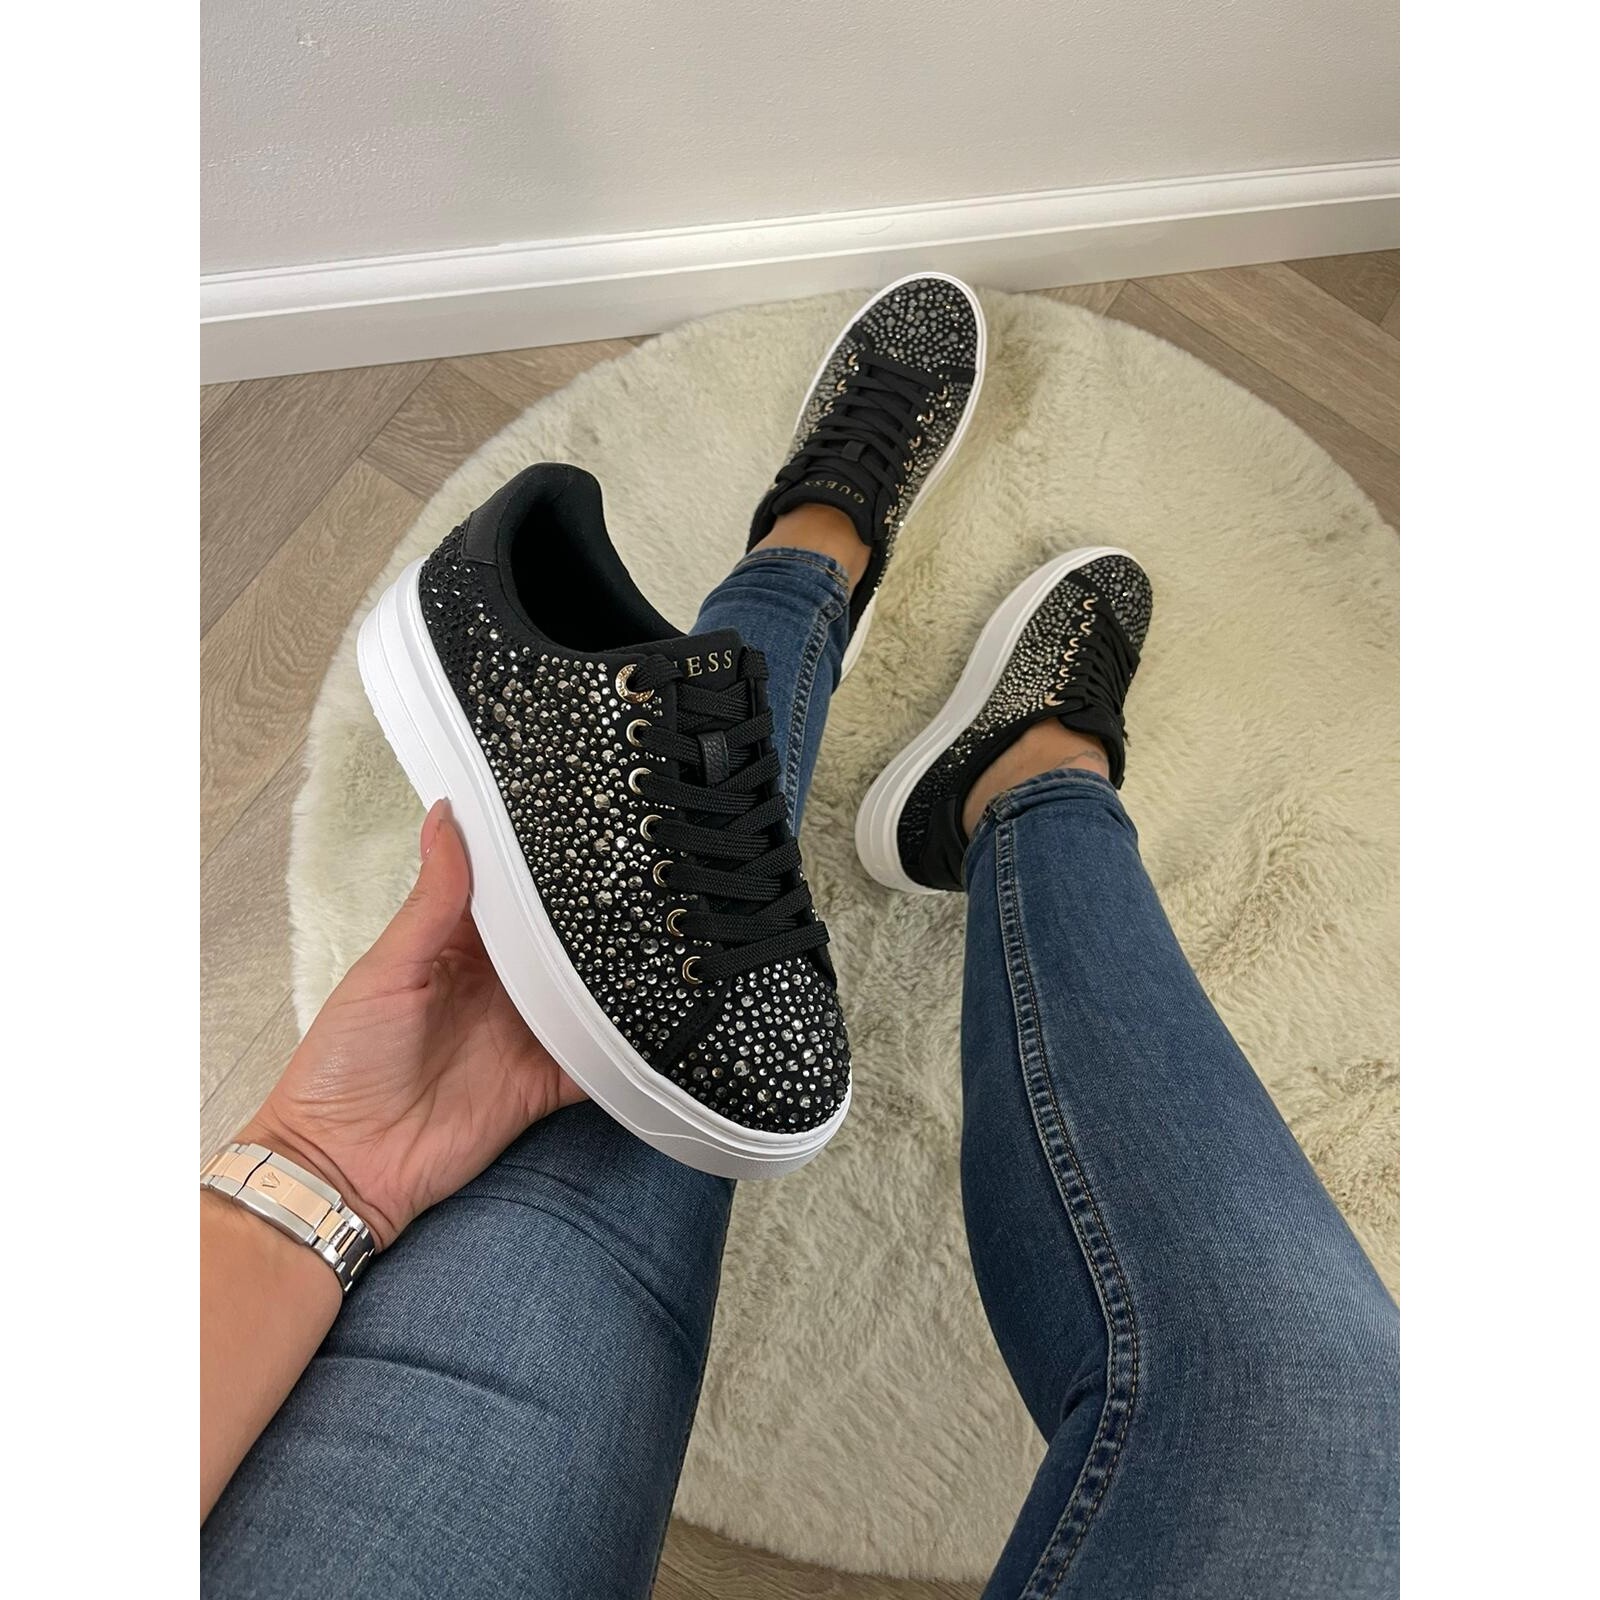 Guess Sneakers  Macy Strass Black Guess  751